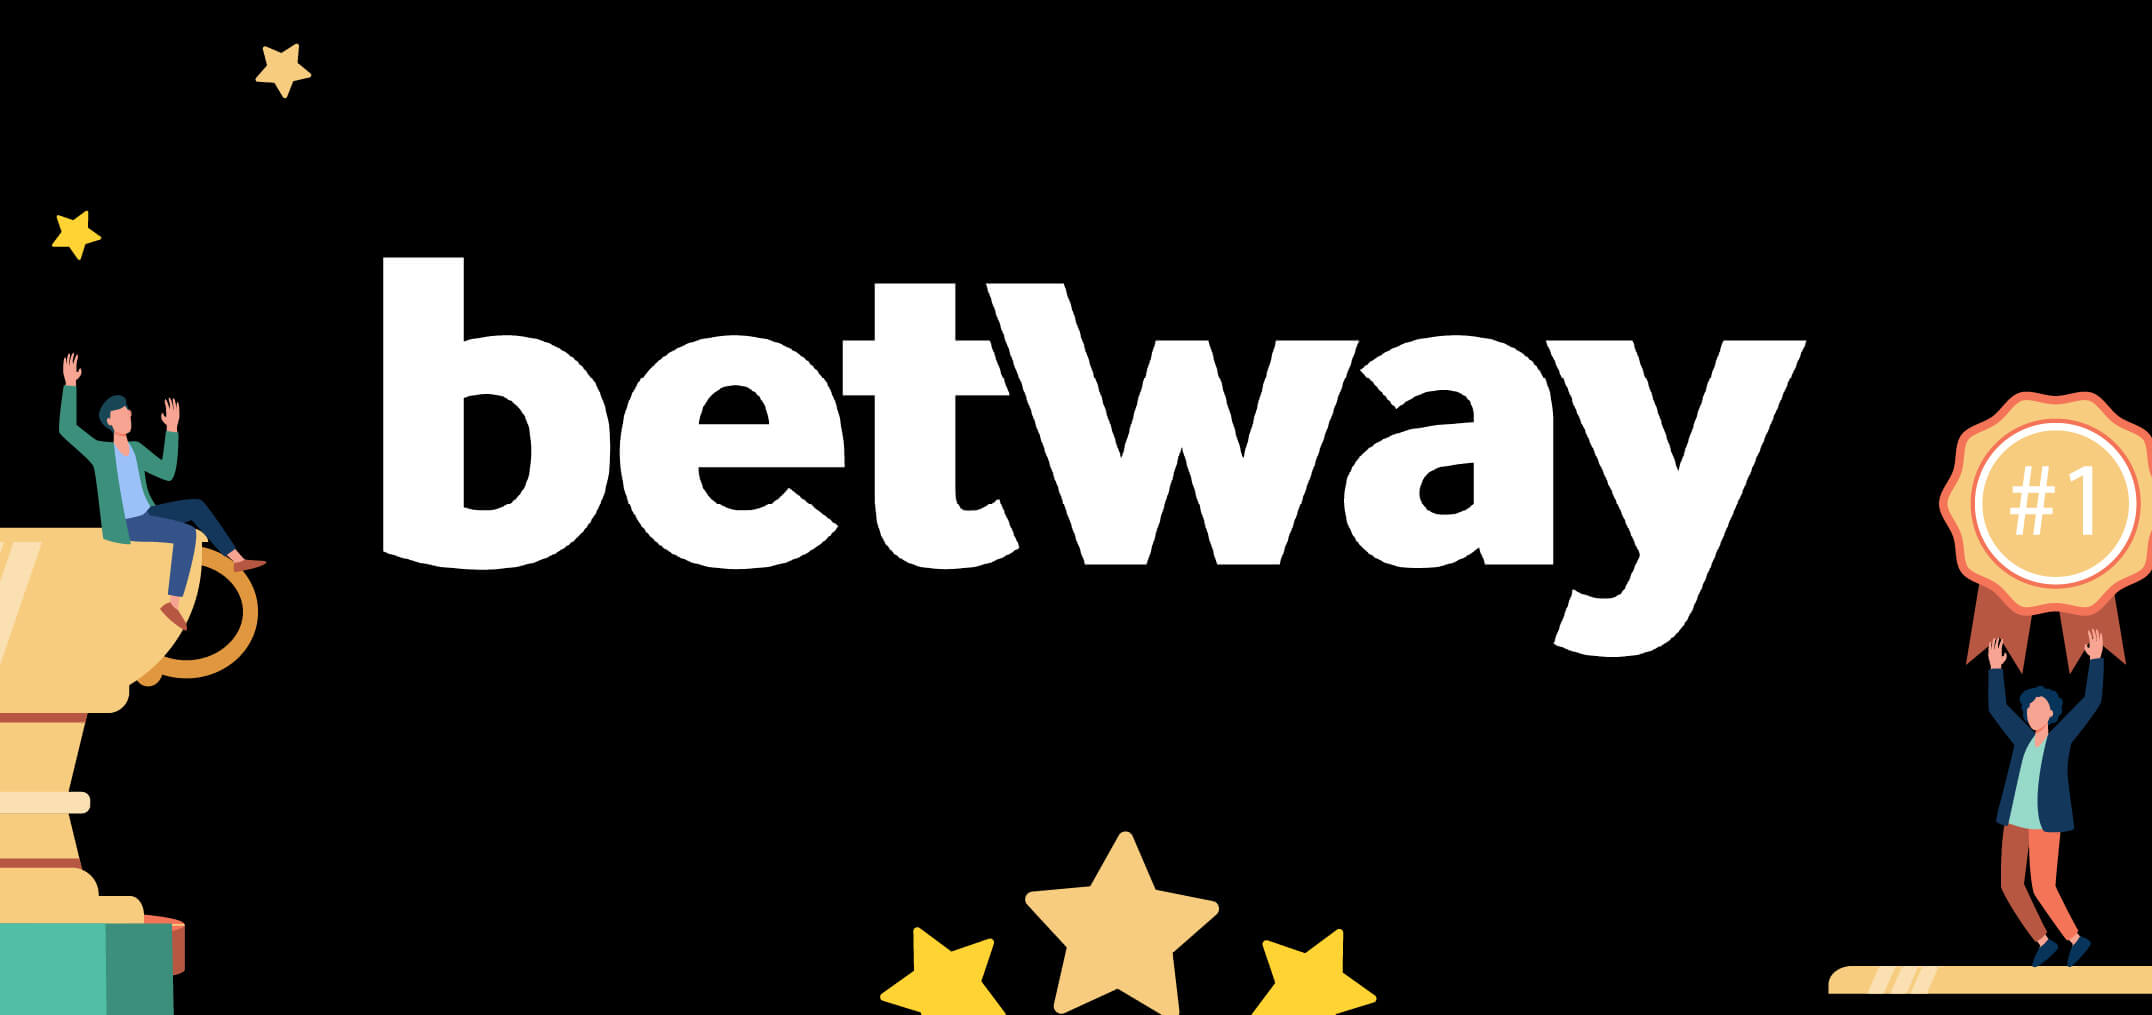 Betway betting in India